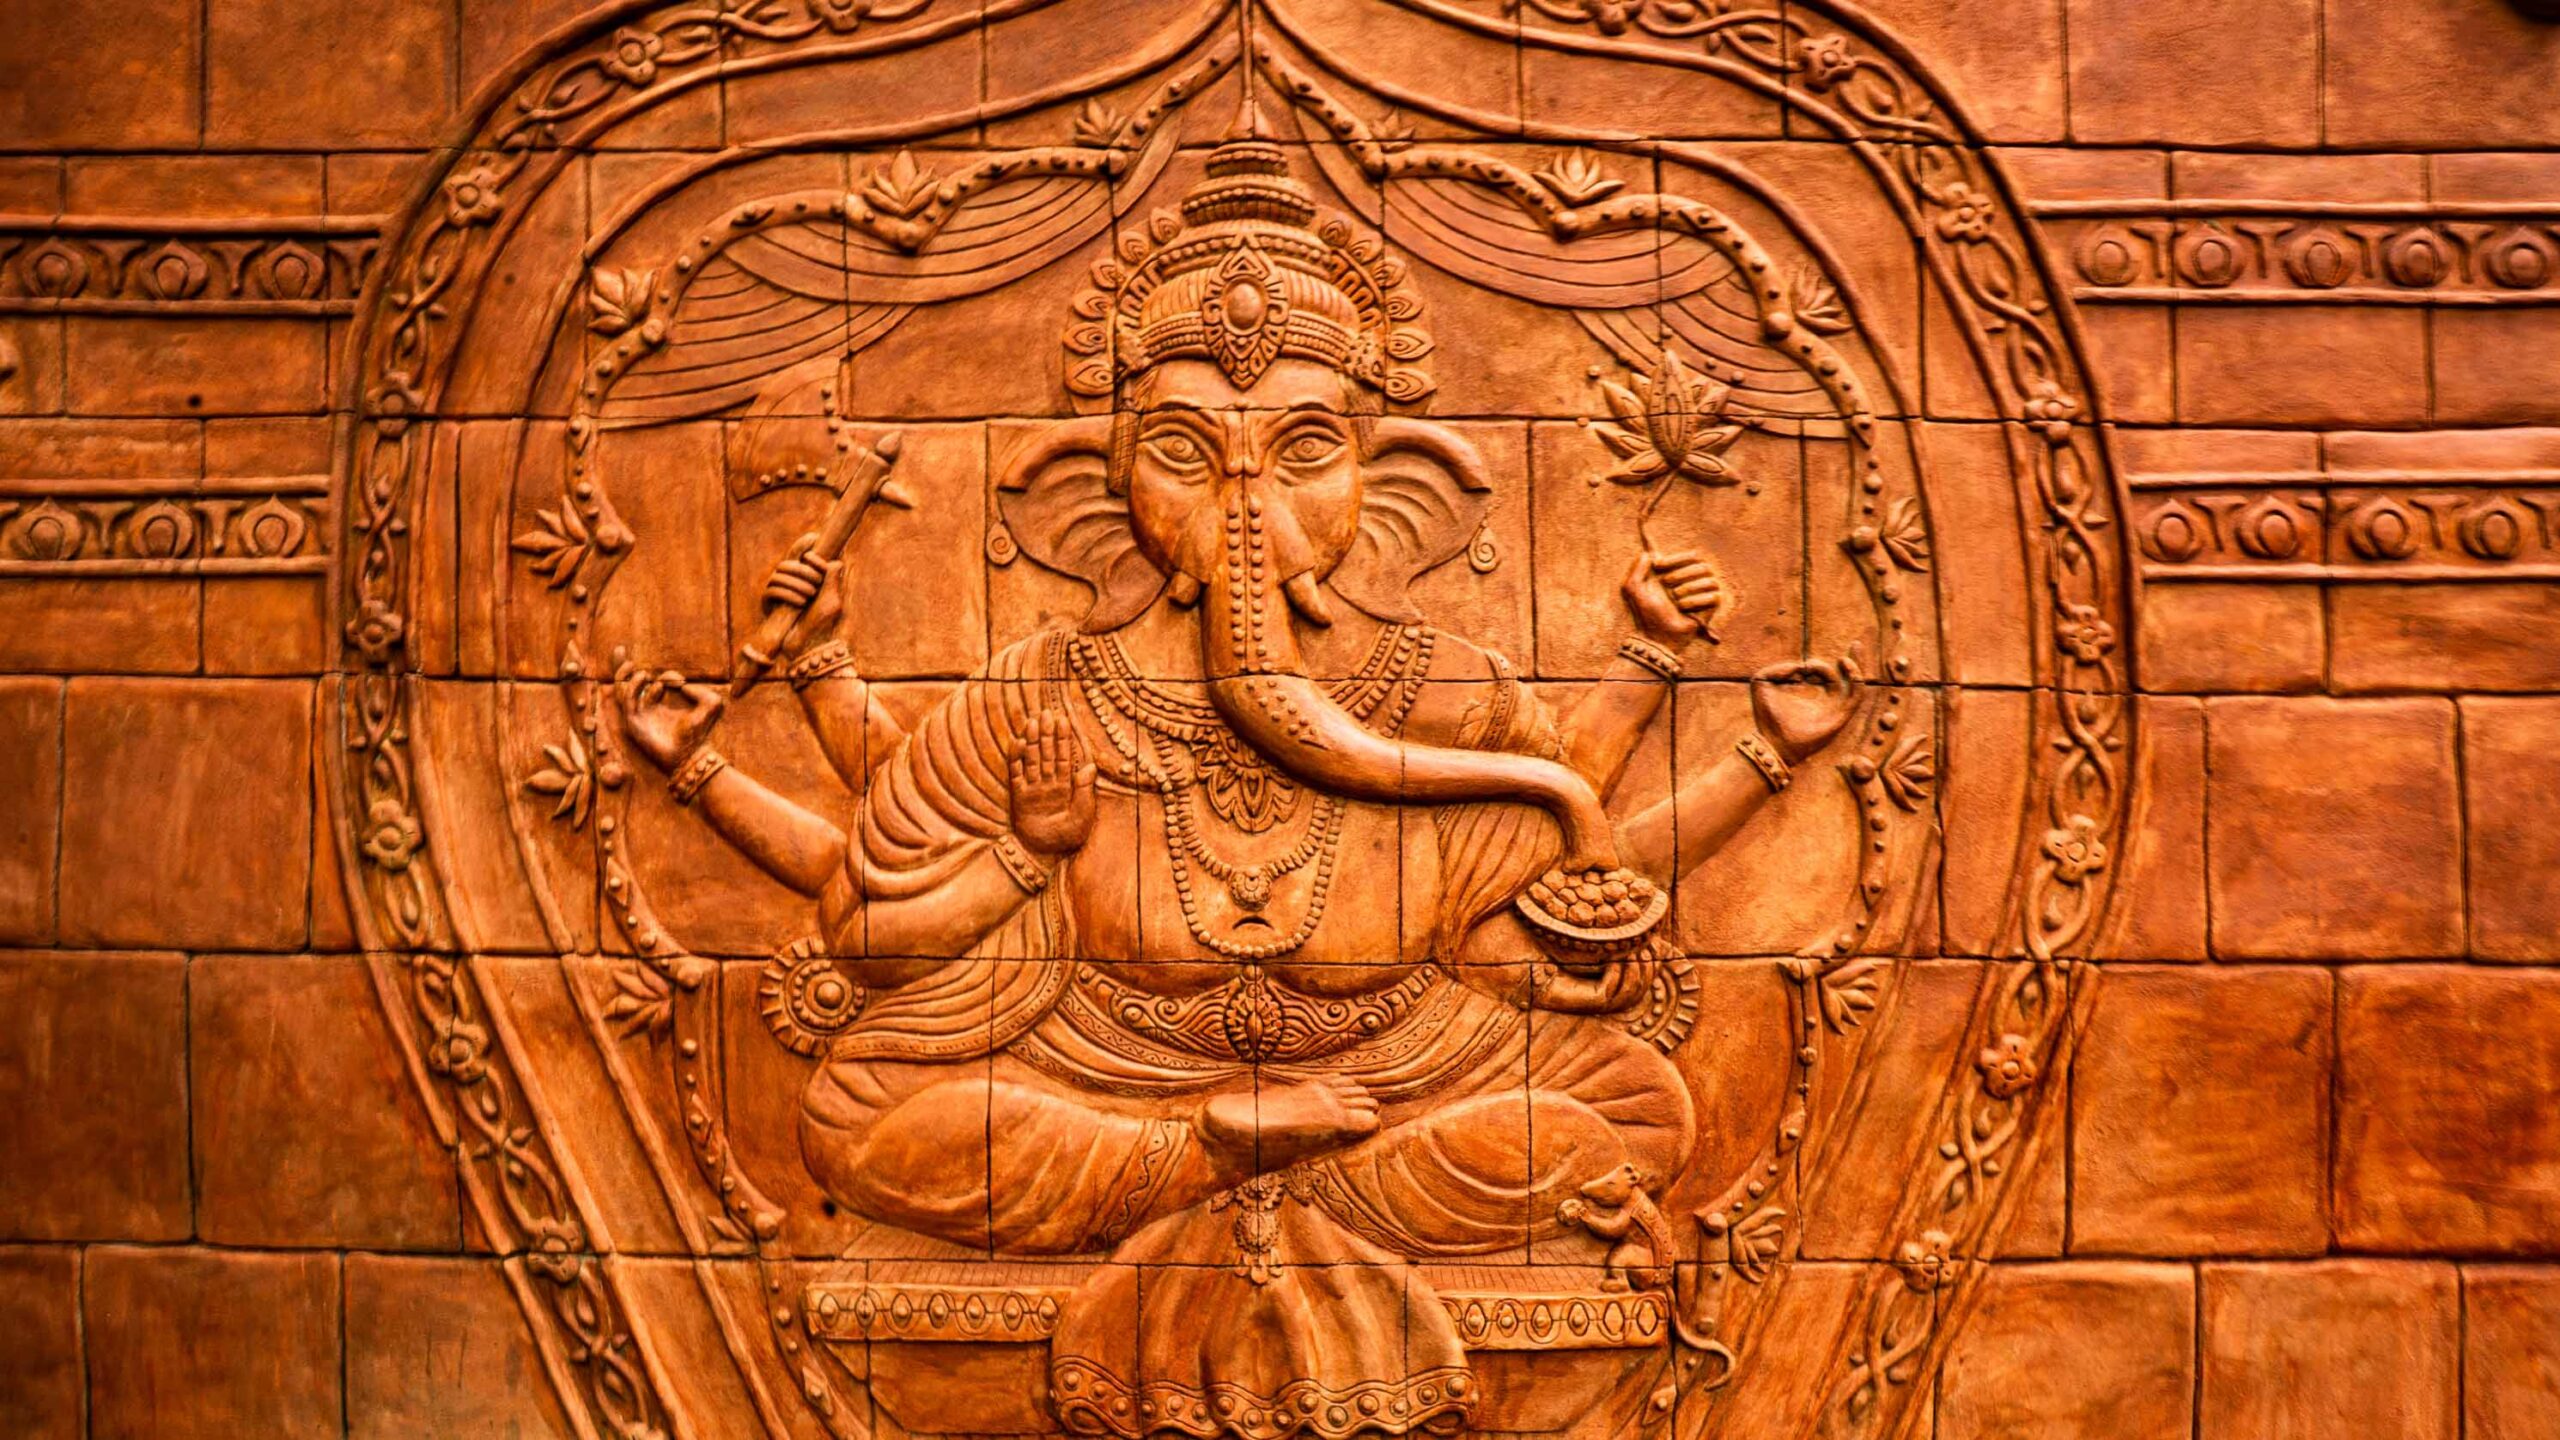 Spectacular carving of a Ganesha in our jungle book temple